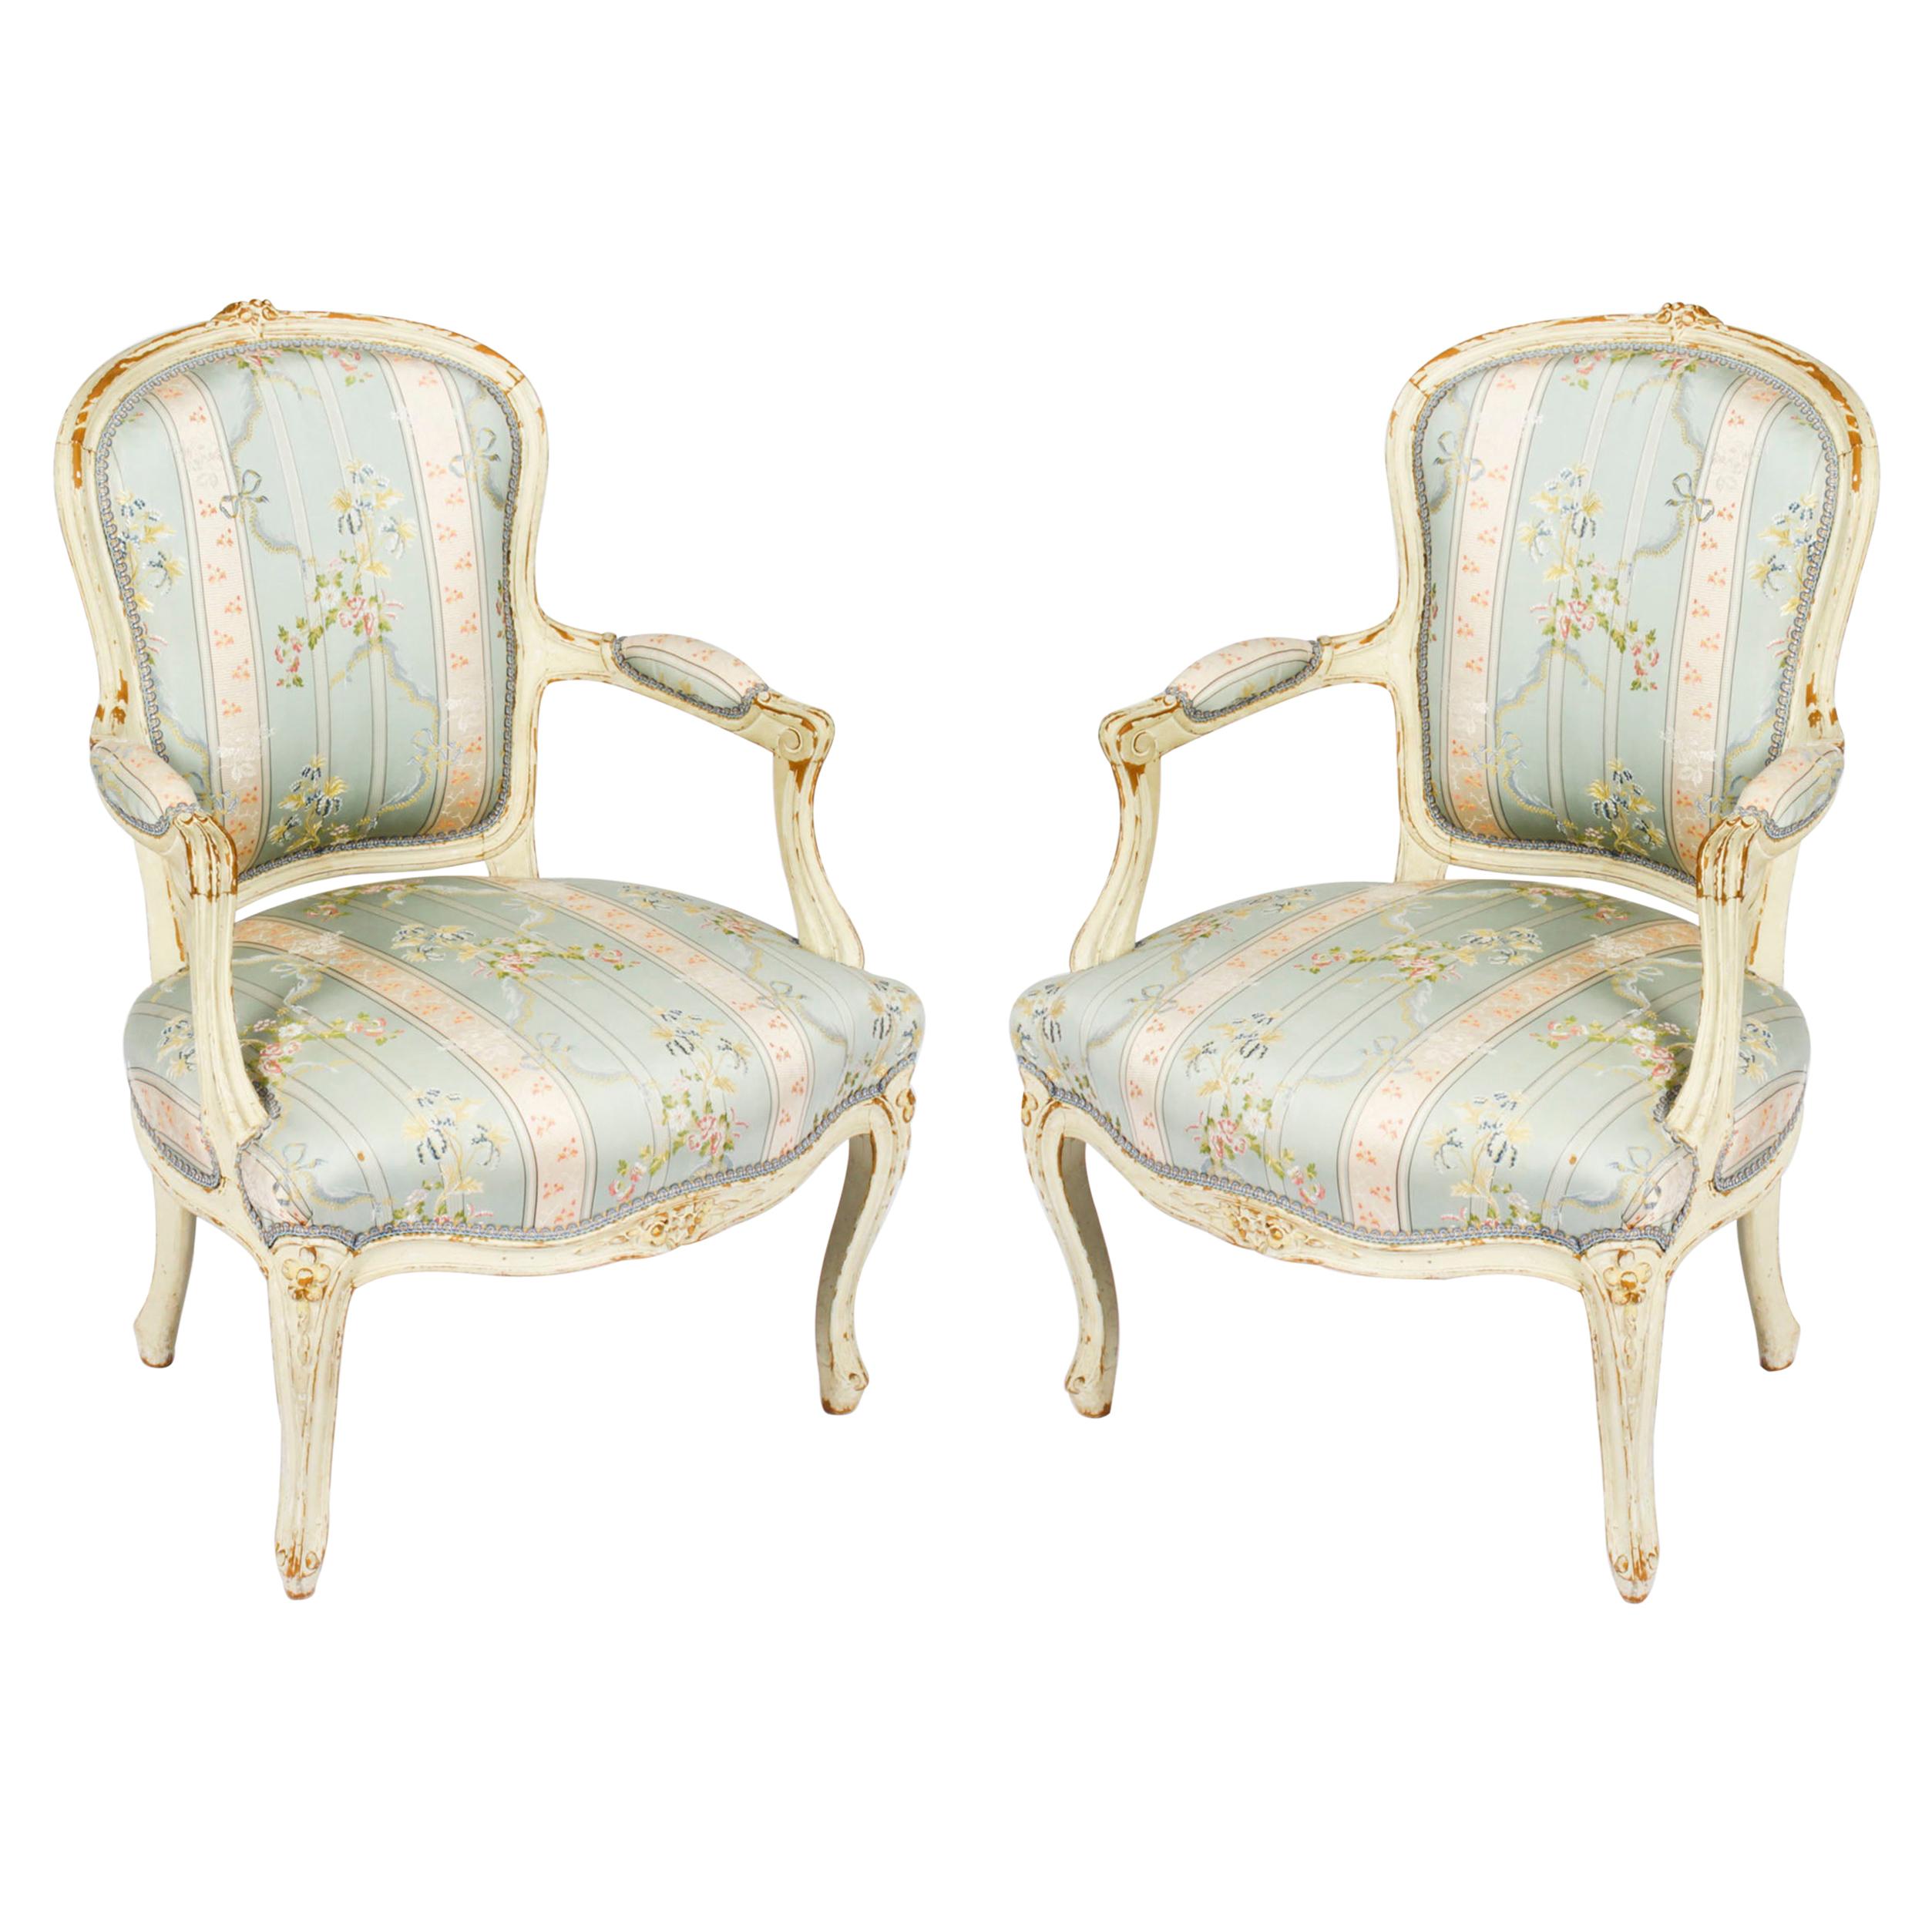 Antique Pair Shabby Chic Louis Revival French Painted Armchairs, 19th Century